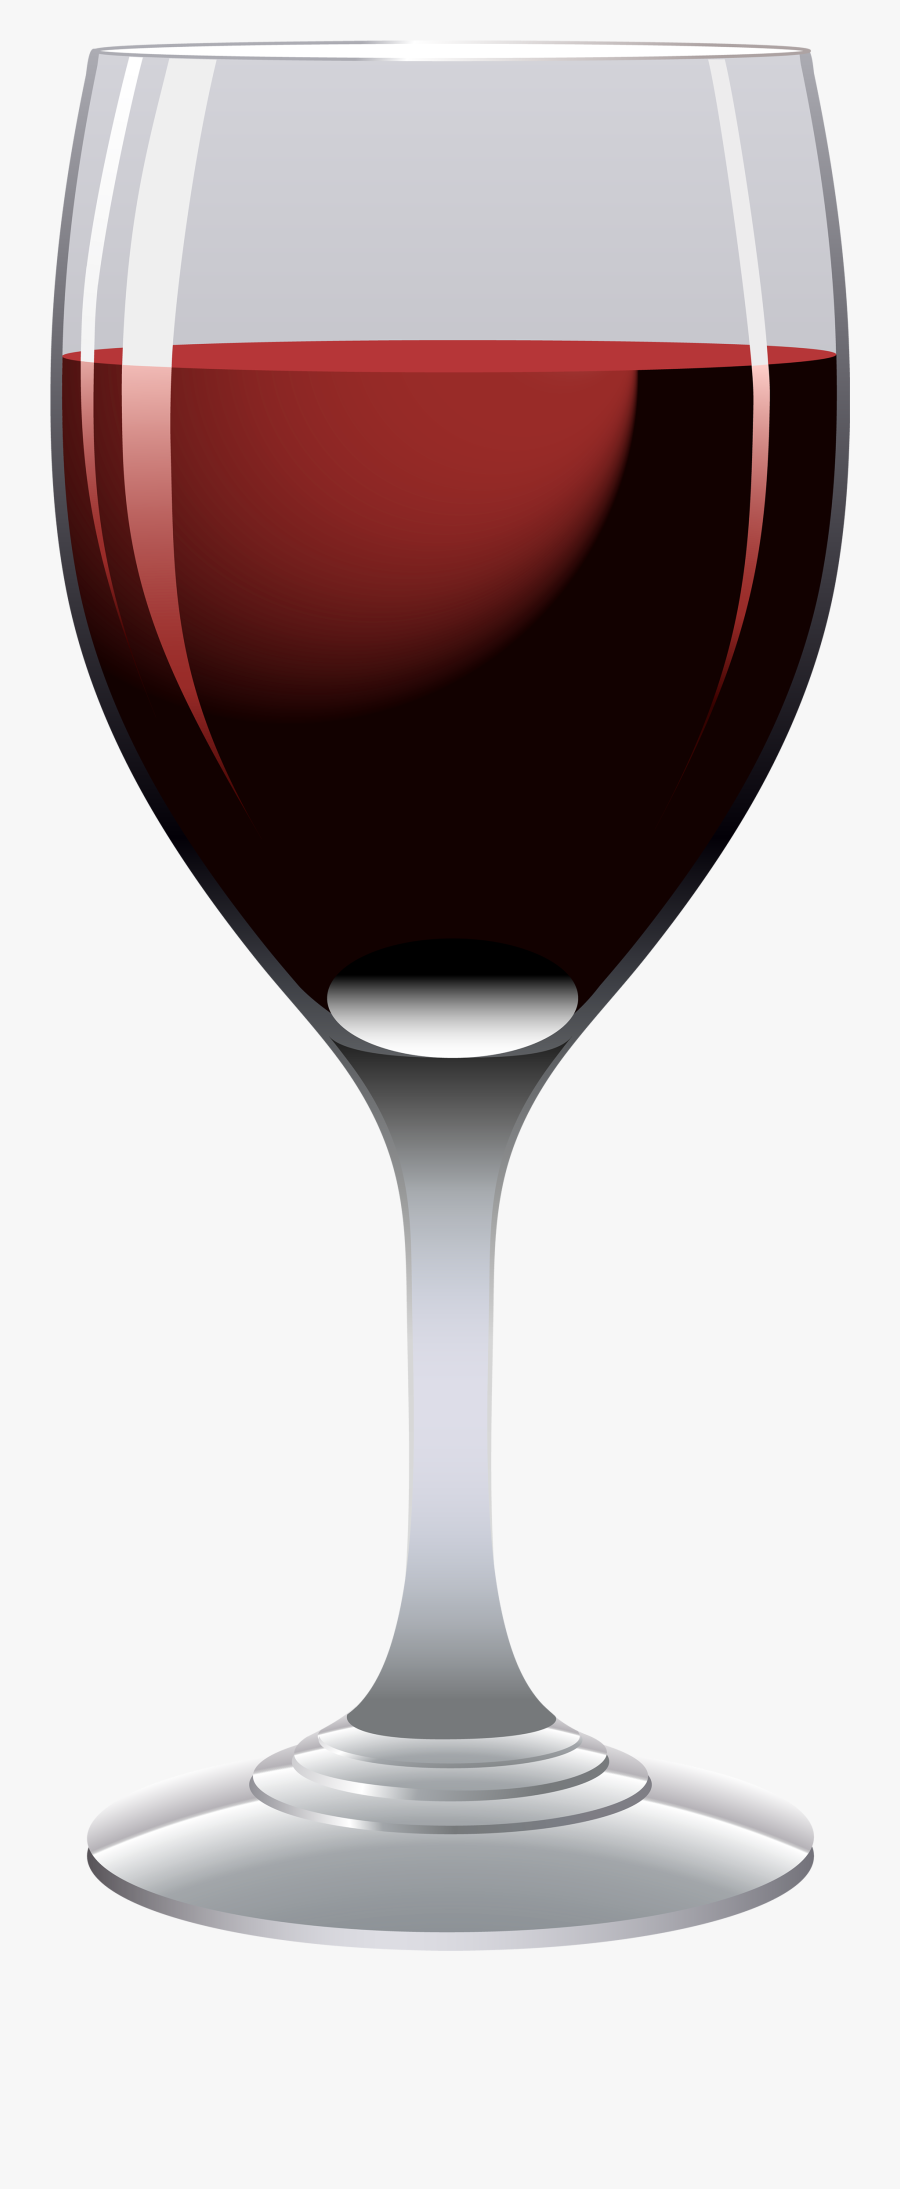 Clip Art Wine Glass Clipart - Red Wine Glass Clipart, Transparent Clipart